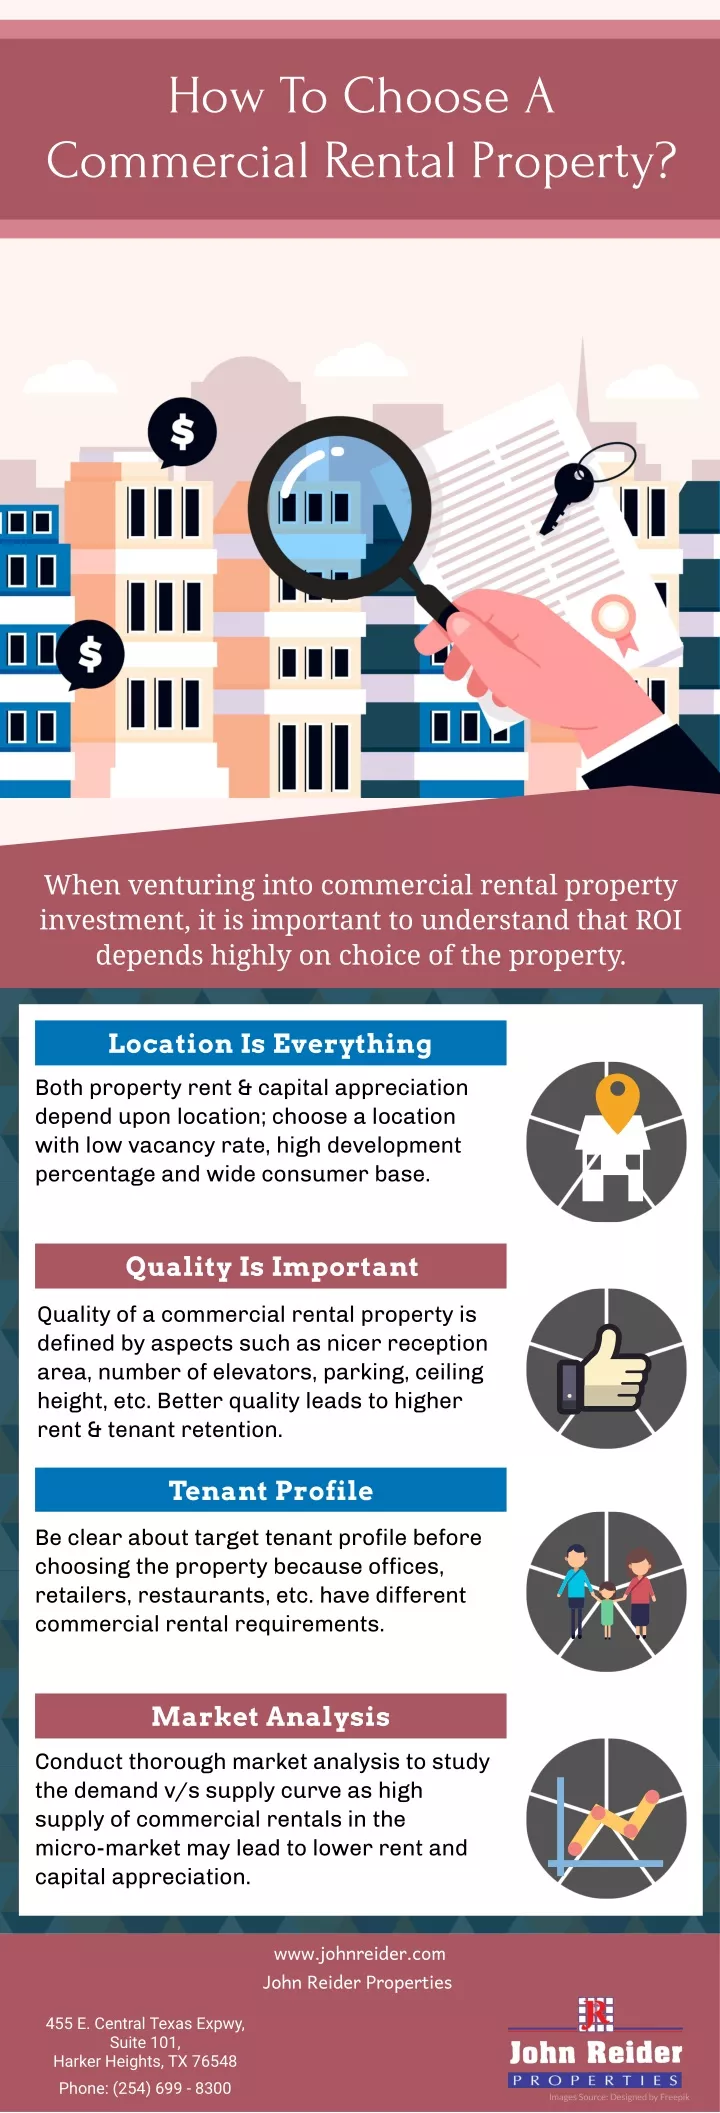 how to choose a commercial rental property